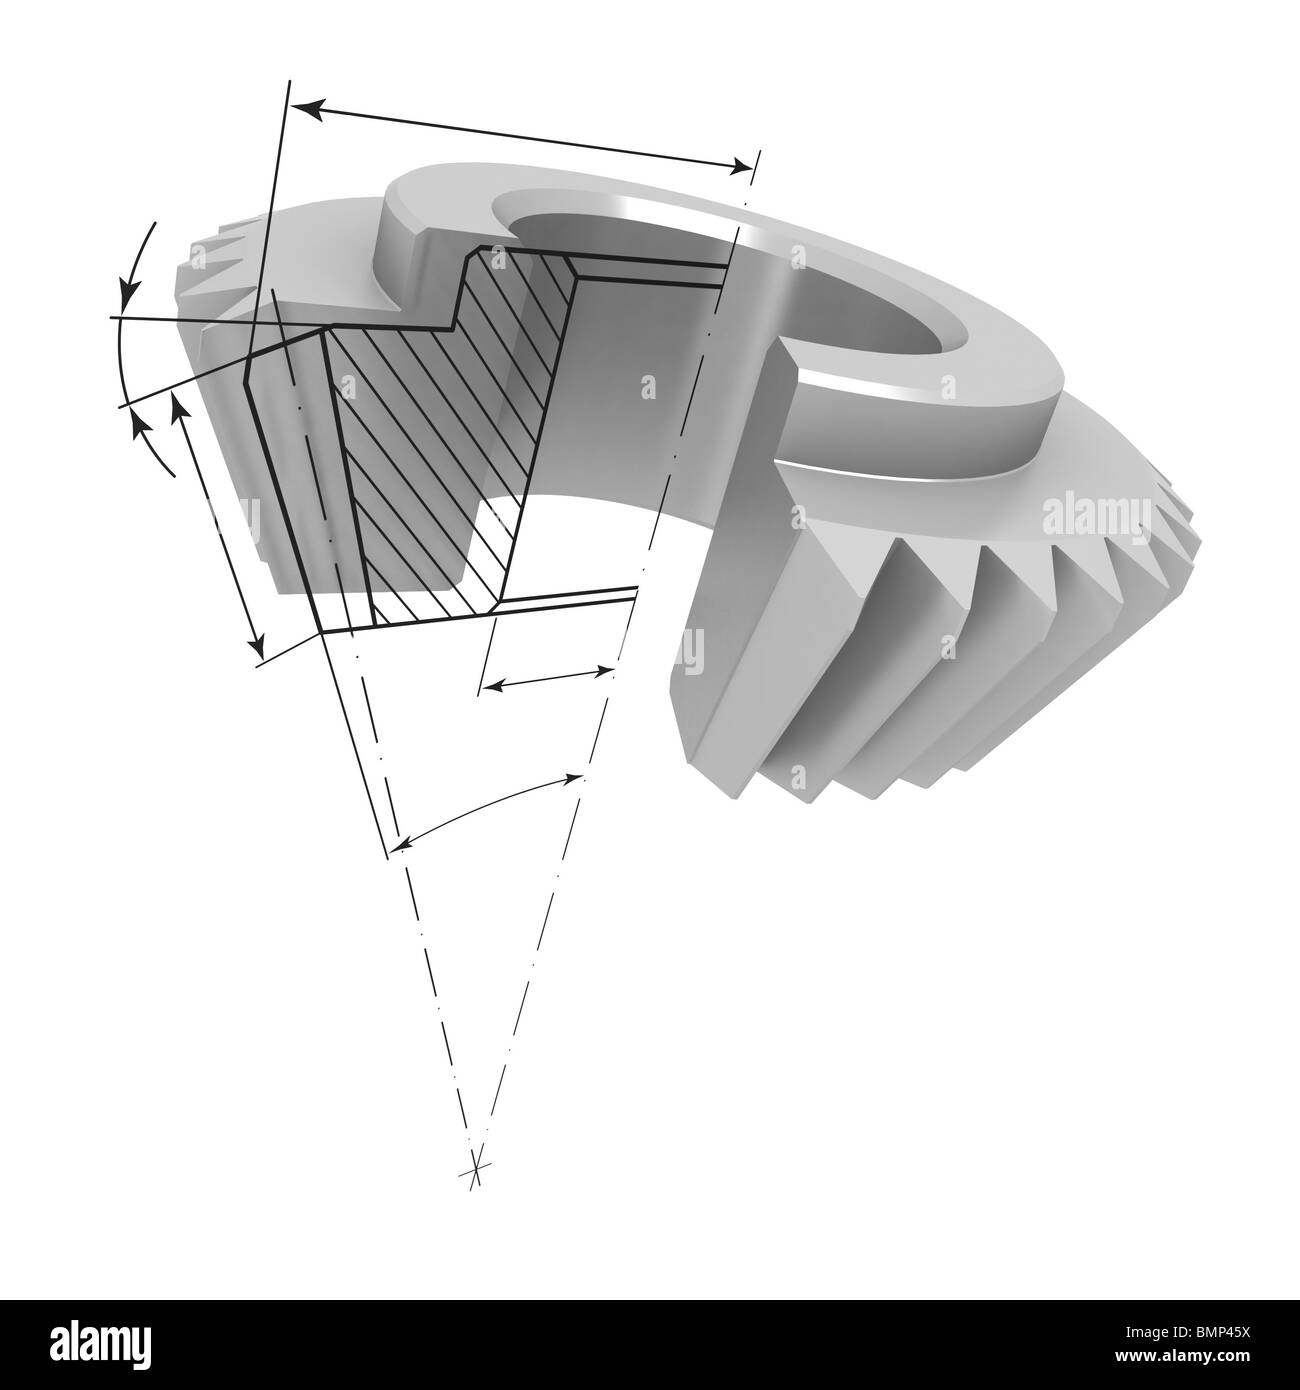 Three-dimensional model bevel gear in the section. At the cut projected drawing details. Stock Photo